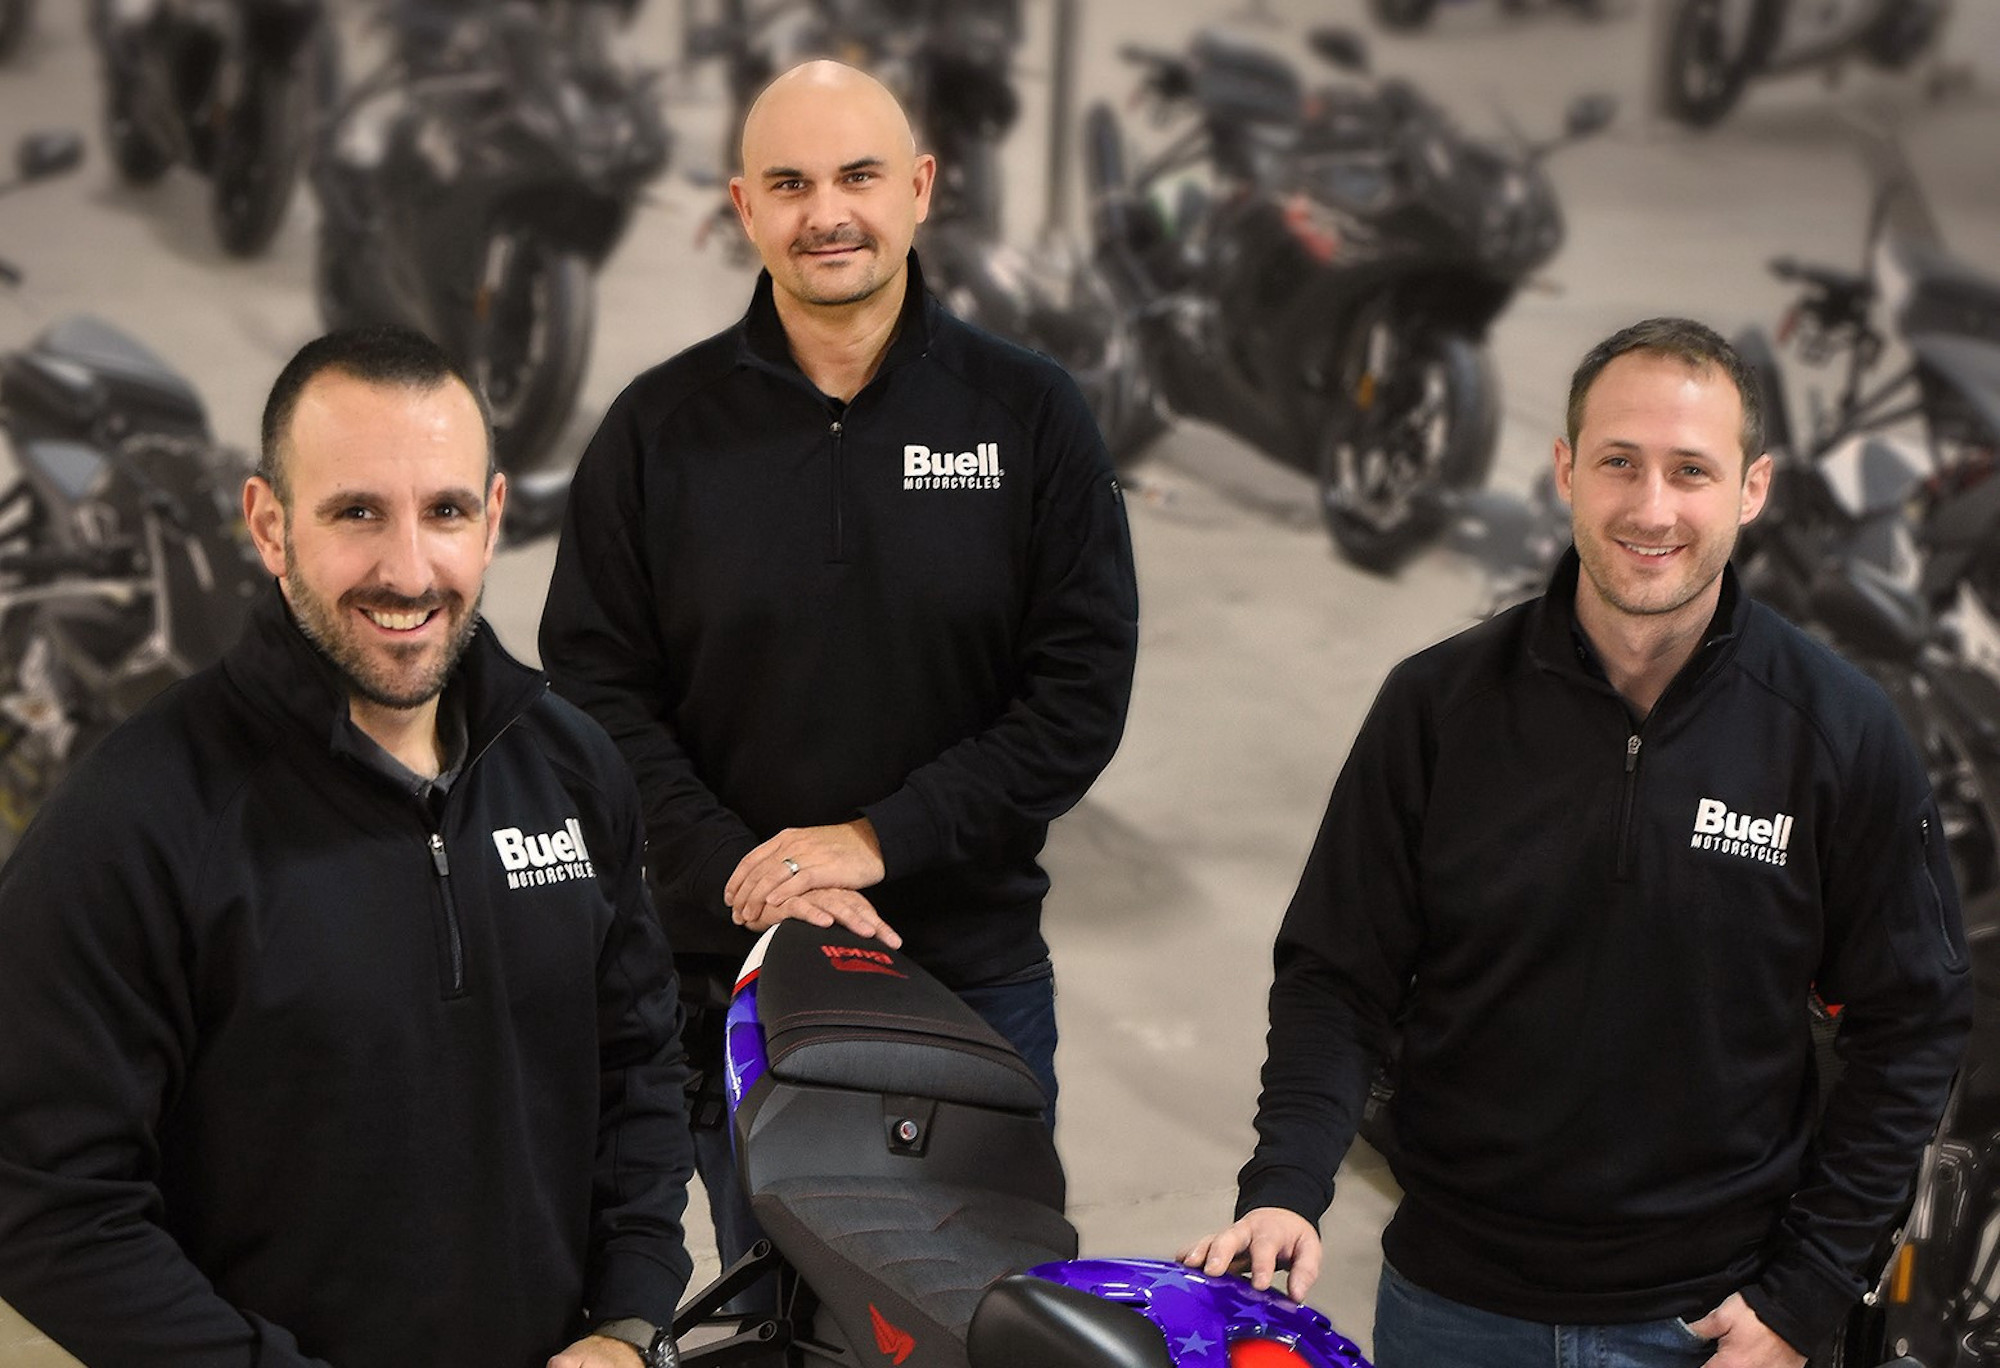 A view of Buell's new employee. From left to right: Jason Anderson, John Nychypor, and Matt Laurent. Media provided from Buell.